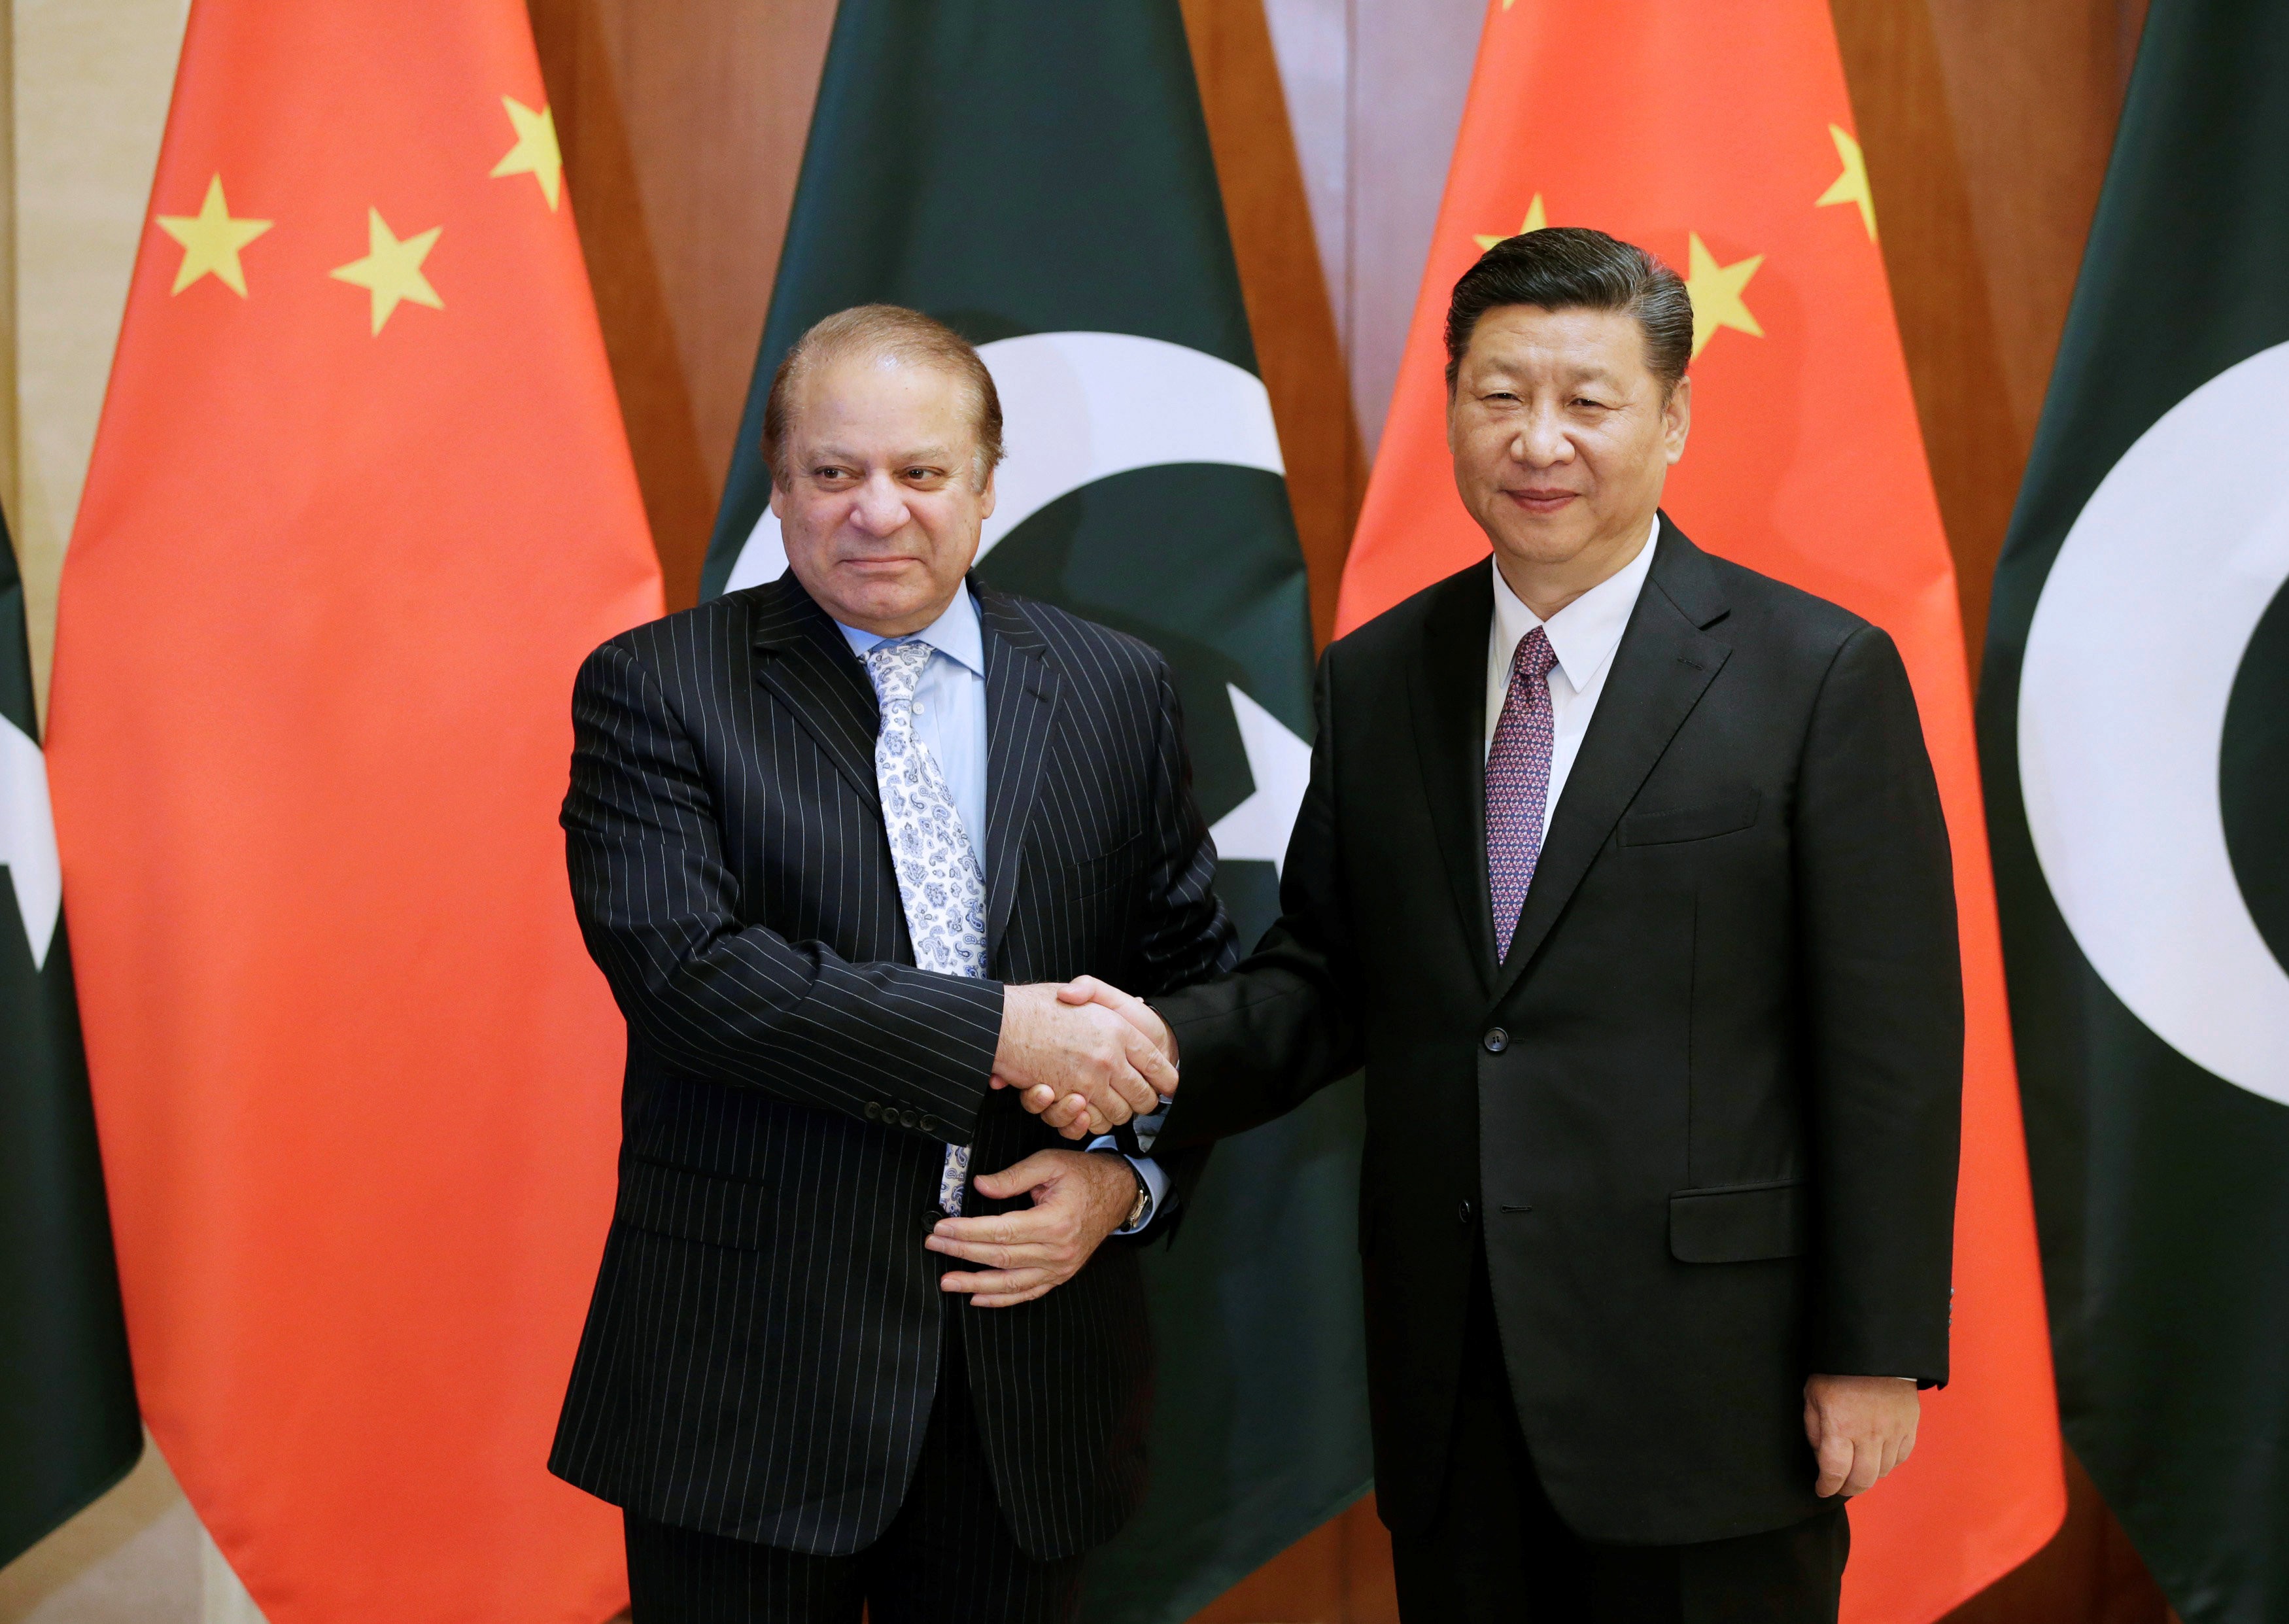 President Xi Jinping of China welcomes Pakistani Prime Minister Nawaz Sharif, ahead of the Belt and Road Forum in Beijing, on May 13. Photo: Reuters